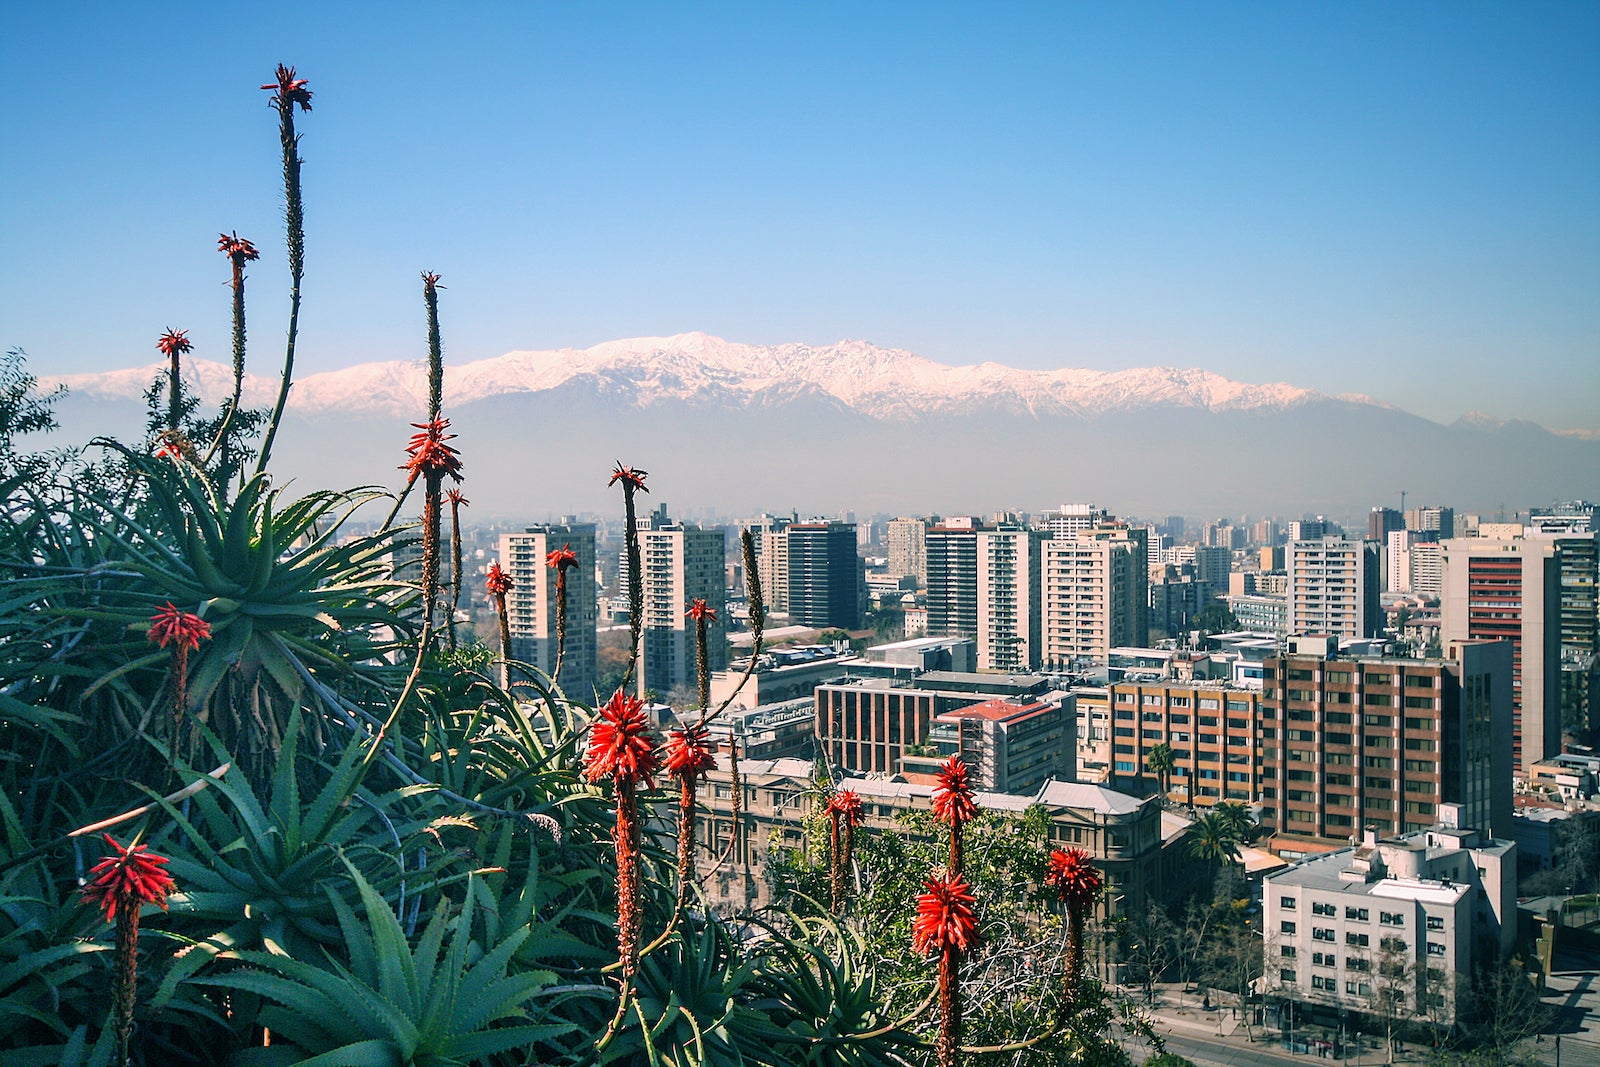 View of the Andes, plants and city from Santa Lucia Hill, Santiago, Chile